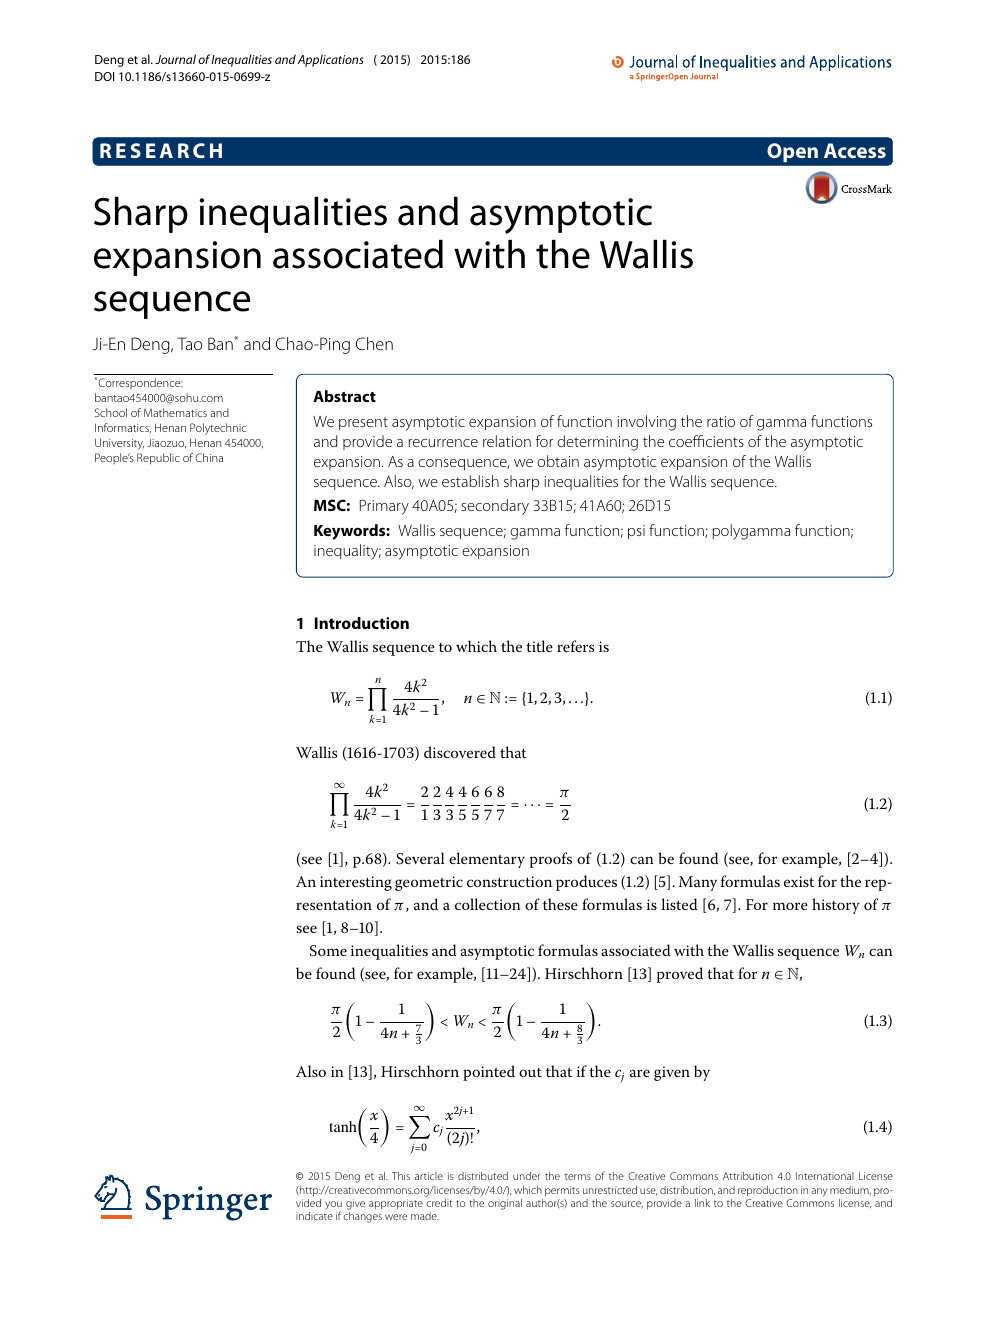 Sharp Inequalities And Asymptotic Expansion Associated With The Wallis Sequence Topic Of Research Paper In Mathematics Download Scholarly Article Pdf And Read For Free On Cyberleninka Open Science Hub